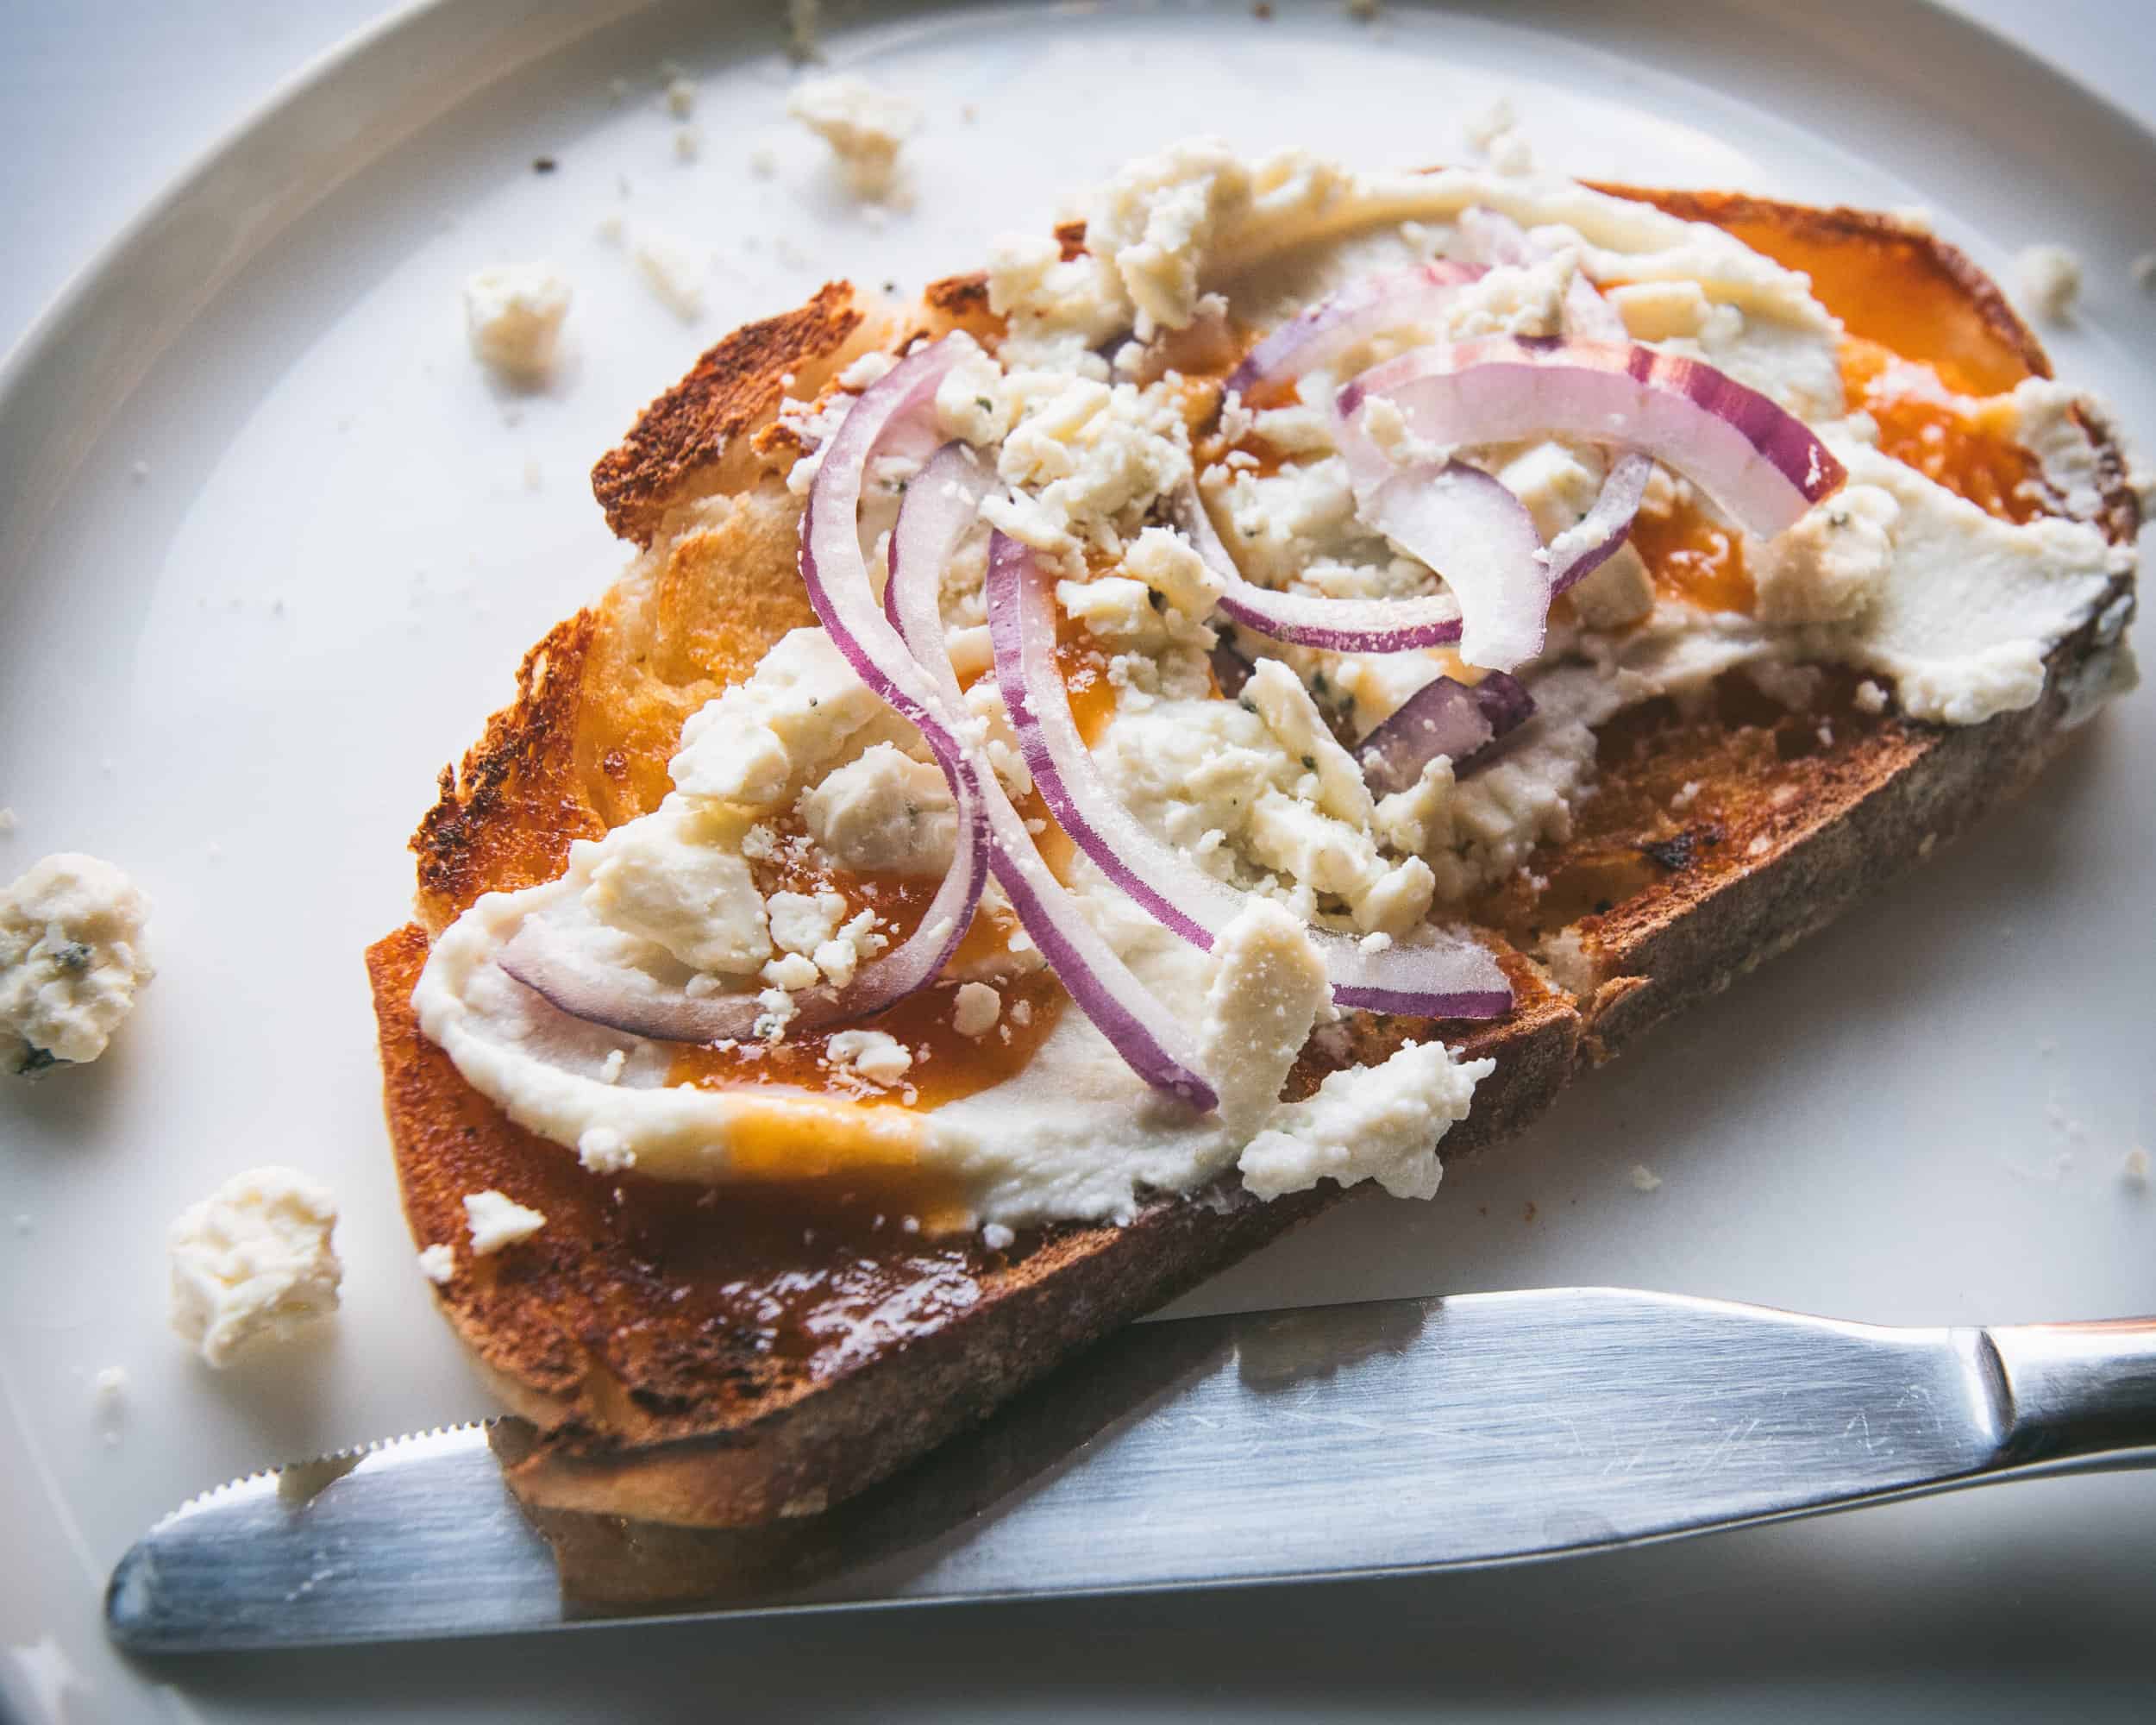 Toasted bread topped with buffalo sauce, whipped blue cheese spread and sliced red onions